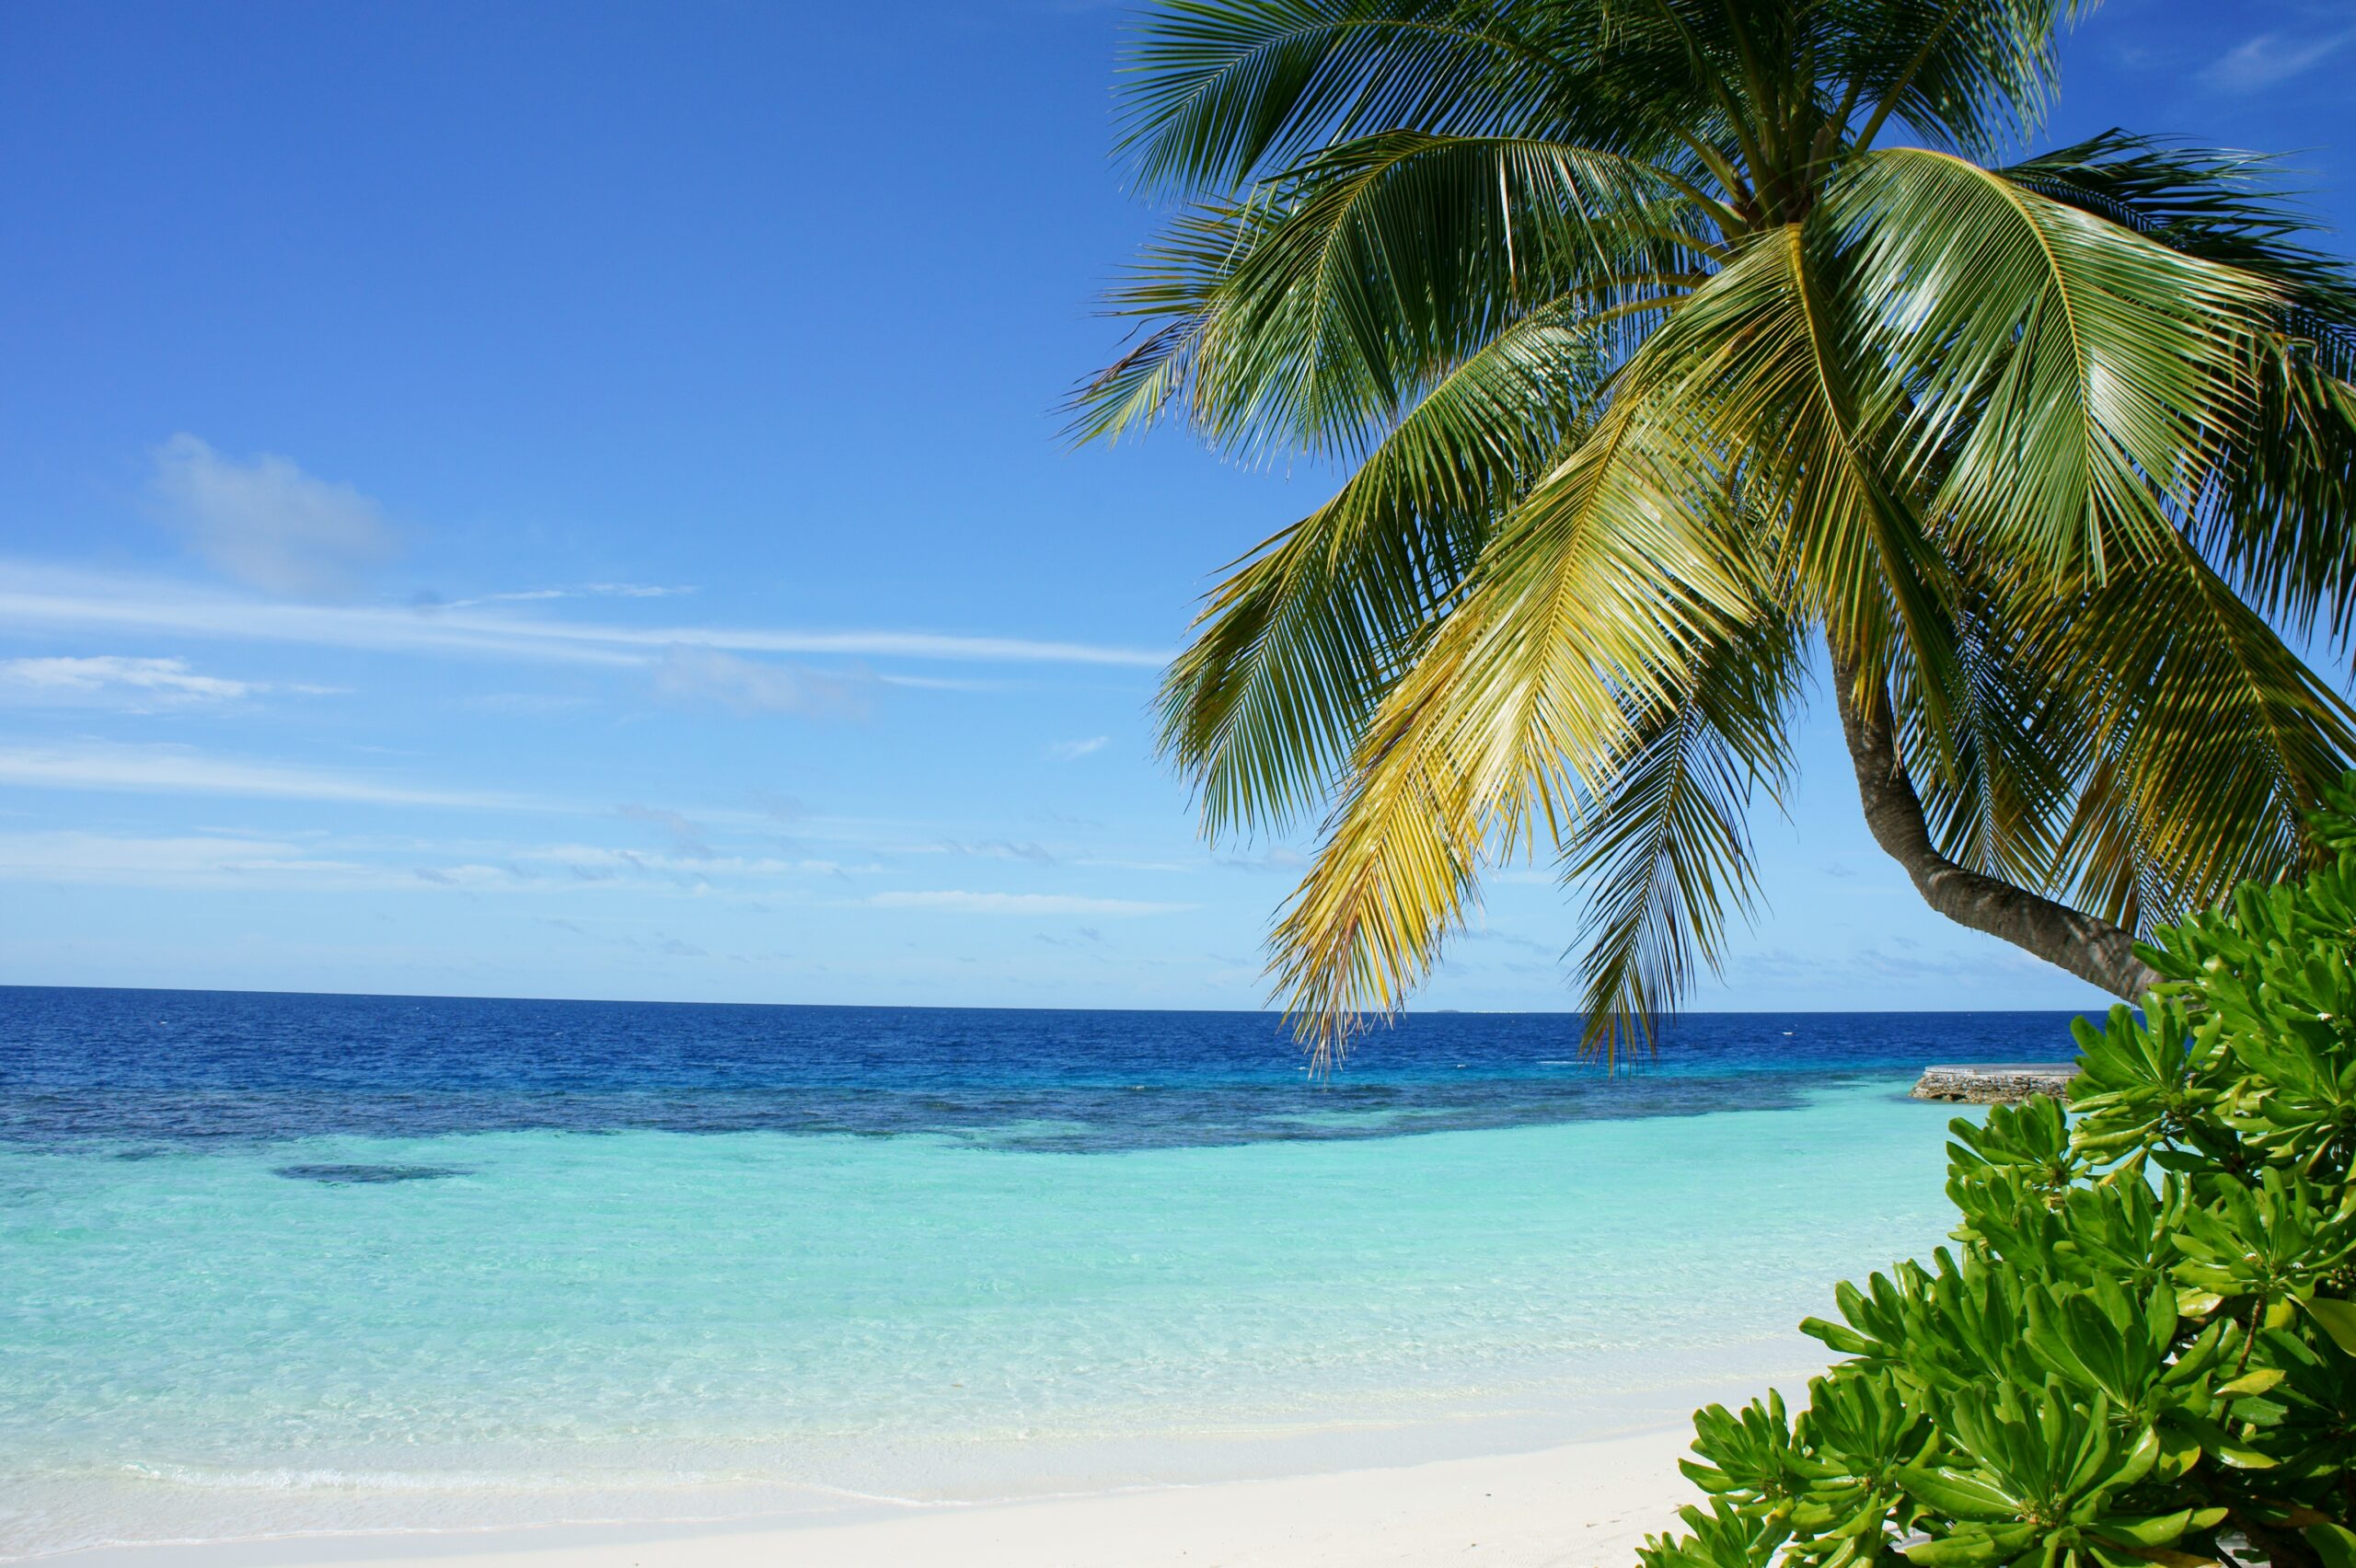 The Maldives are a chain of islands that are considered nearly remote and very tranquil. The destination is perfect for winter vacation. 
Pictured: a large palm tree in front of turquoise waters and a blue clear sky in the Maldives